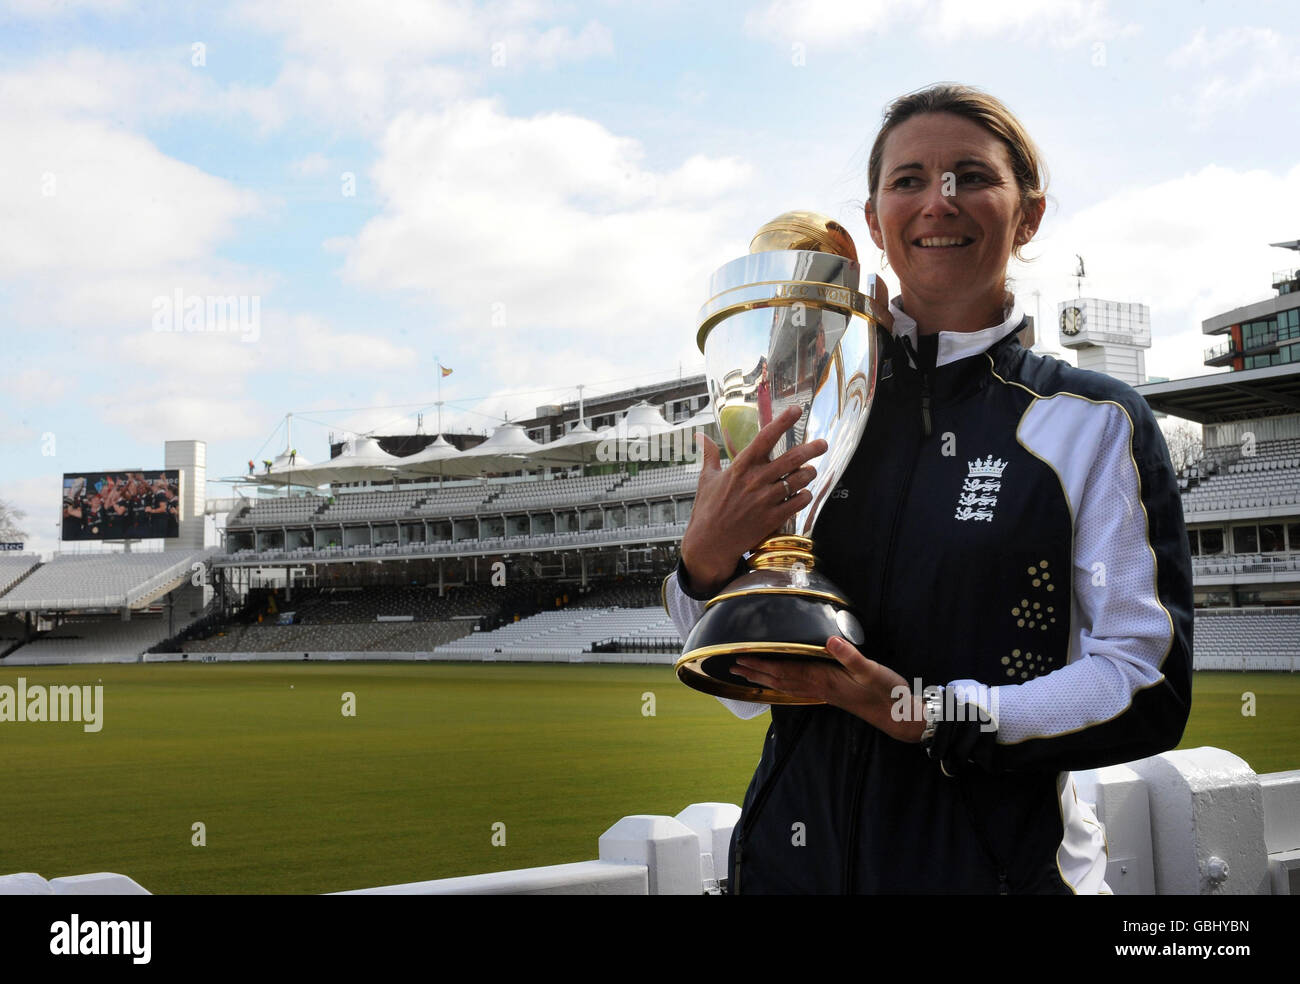 England Womens' cricket captain Charlotte Edwards holds the trophy